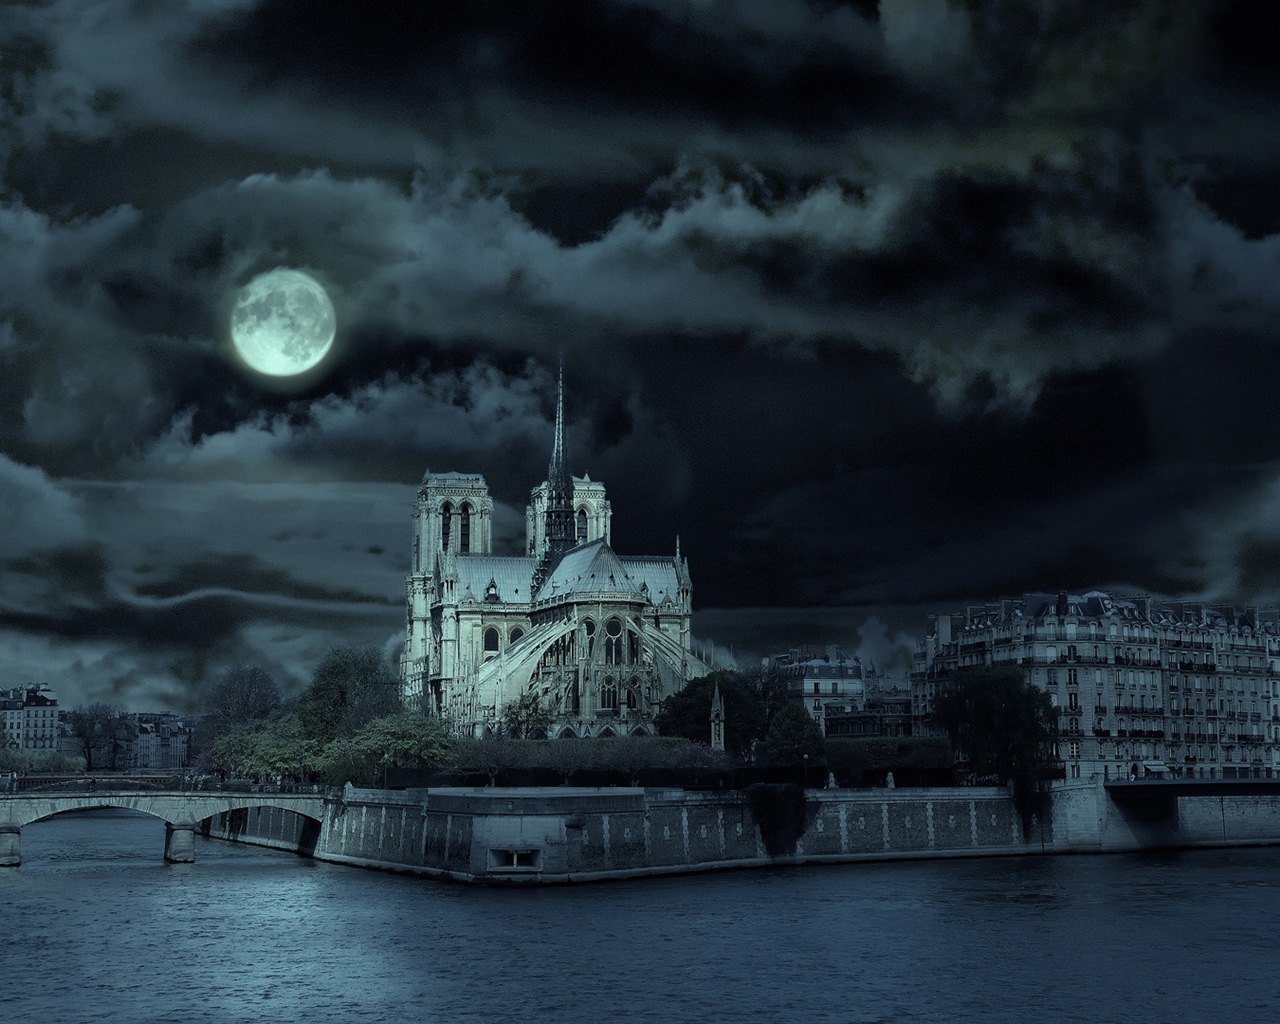 Notre Dame HD Wallpapers #11 - 1280x1024